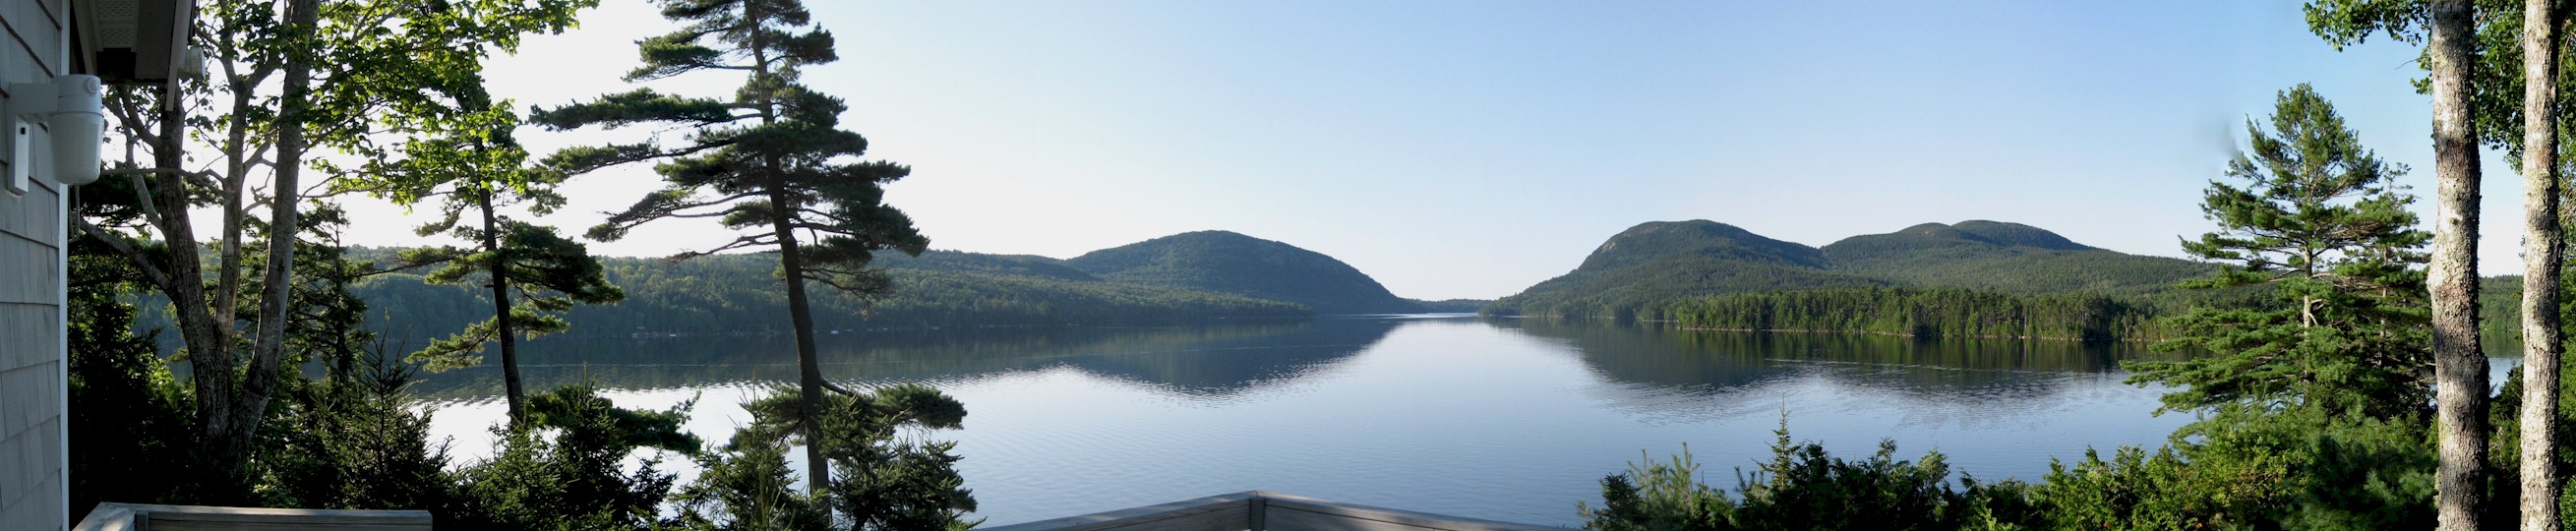 Morning Stillness  reflections of Acadia's Western Mountains over Long Pond taken from Top O' The Ridge